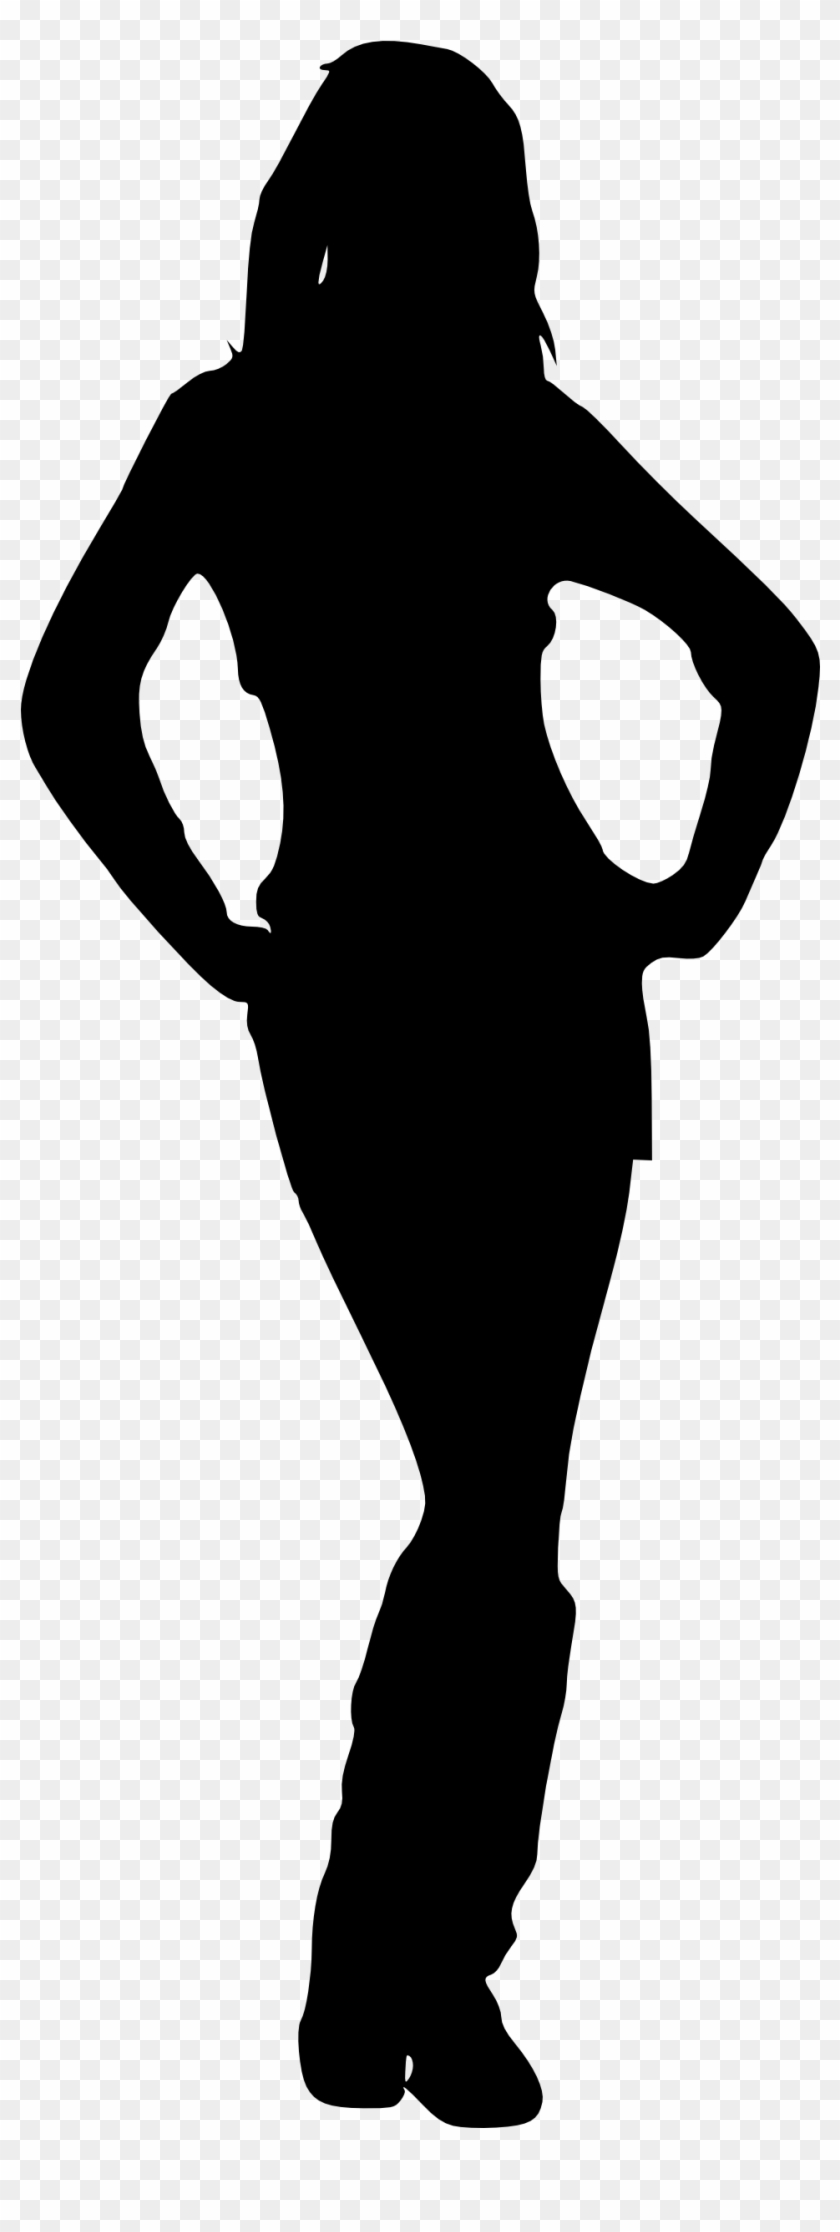 Free Download - Black Outline Of A Woman #370900